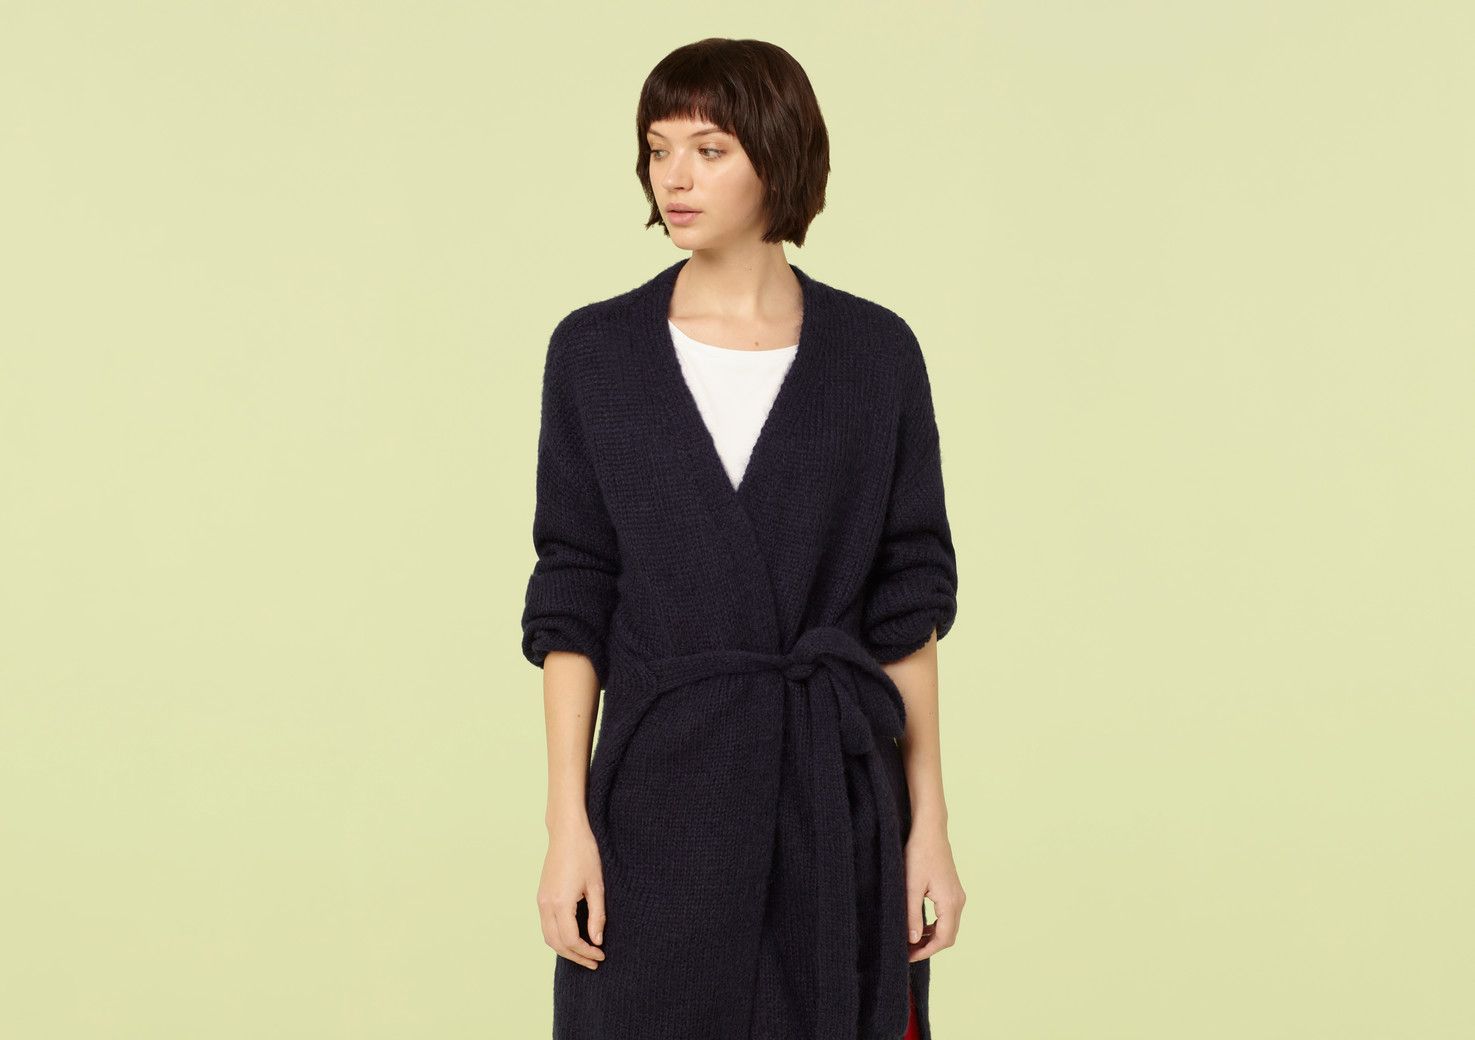 The humble cardigan gets a winter-ready makeover in the form of our Laurel design. Made from soft and cosy mohair-blend fabric, this chic longline style belts at the waist for a shapely finish or can be worn open for a loose and slouchy look.


Model is 5'7